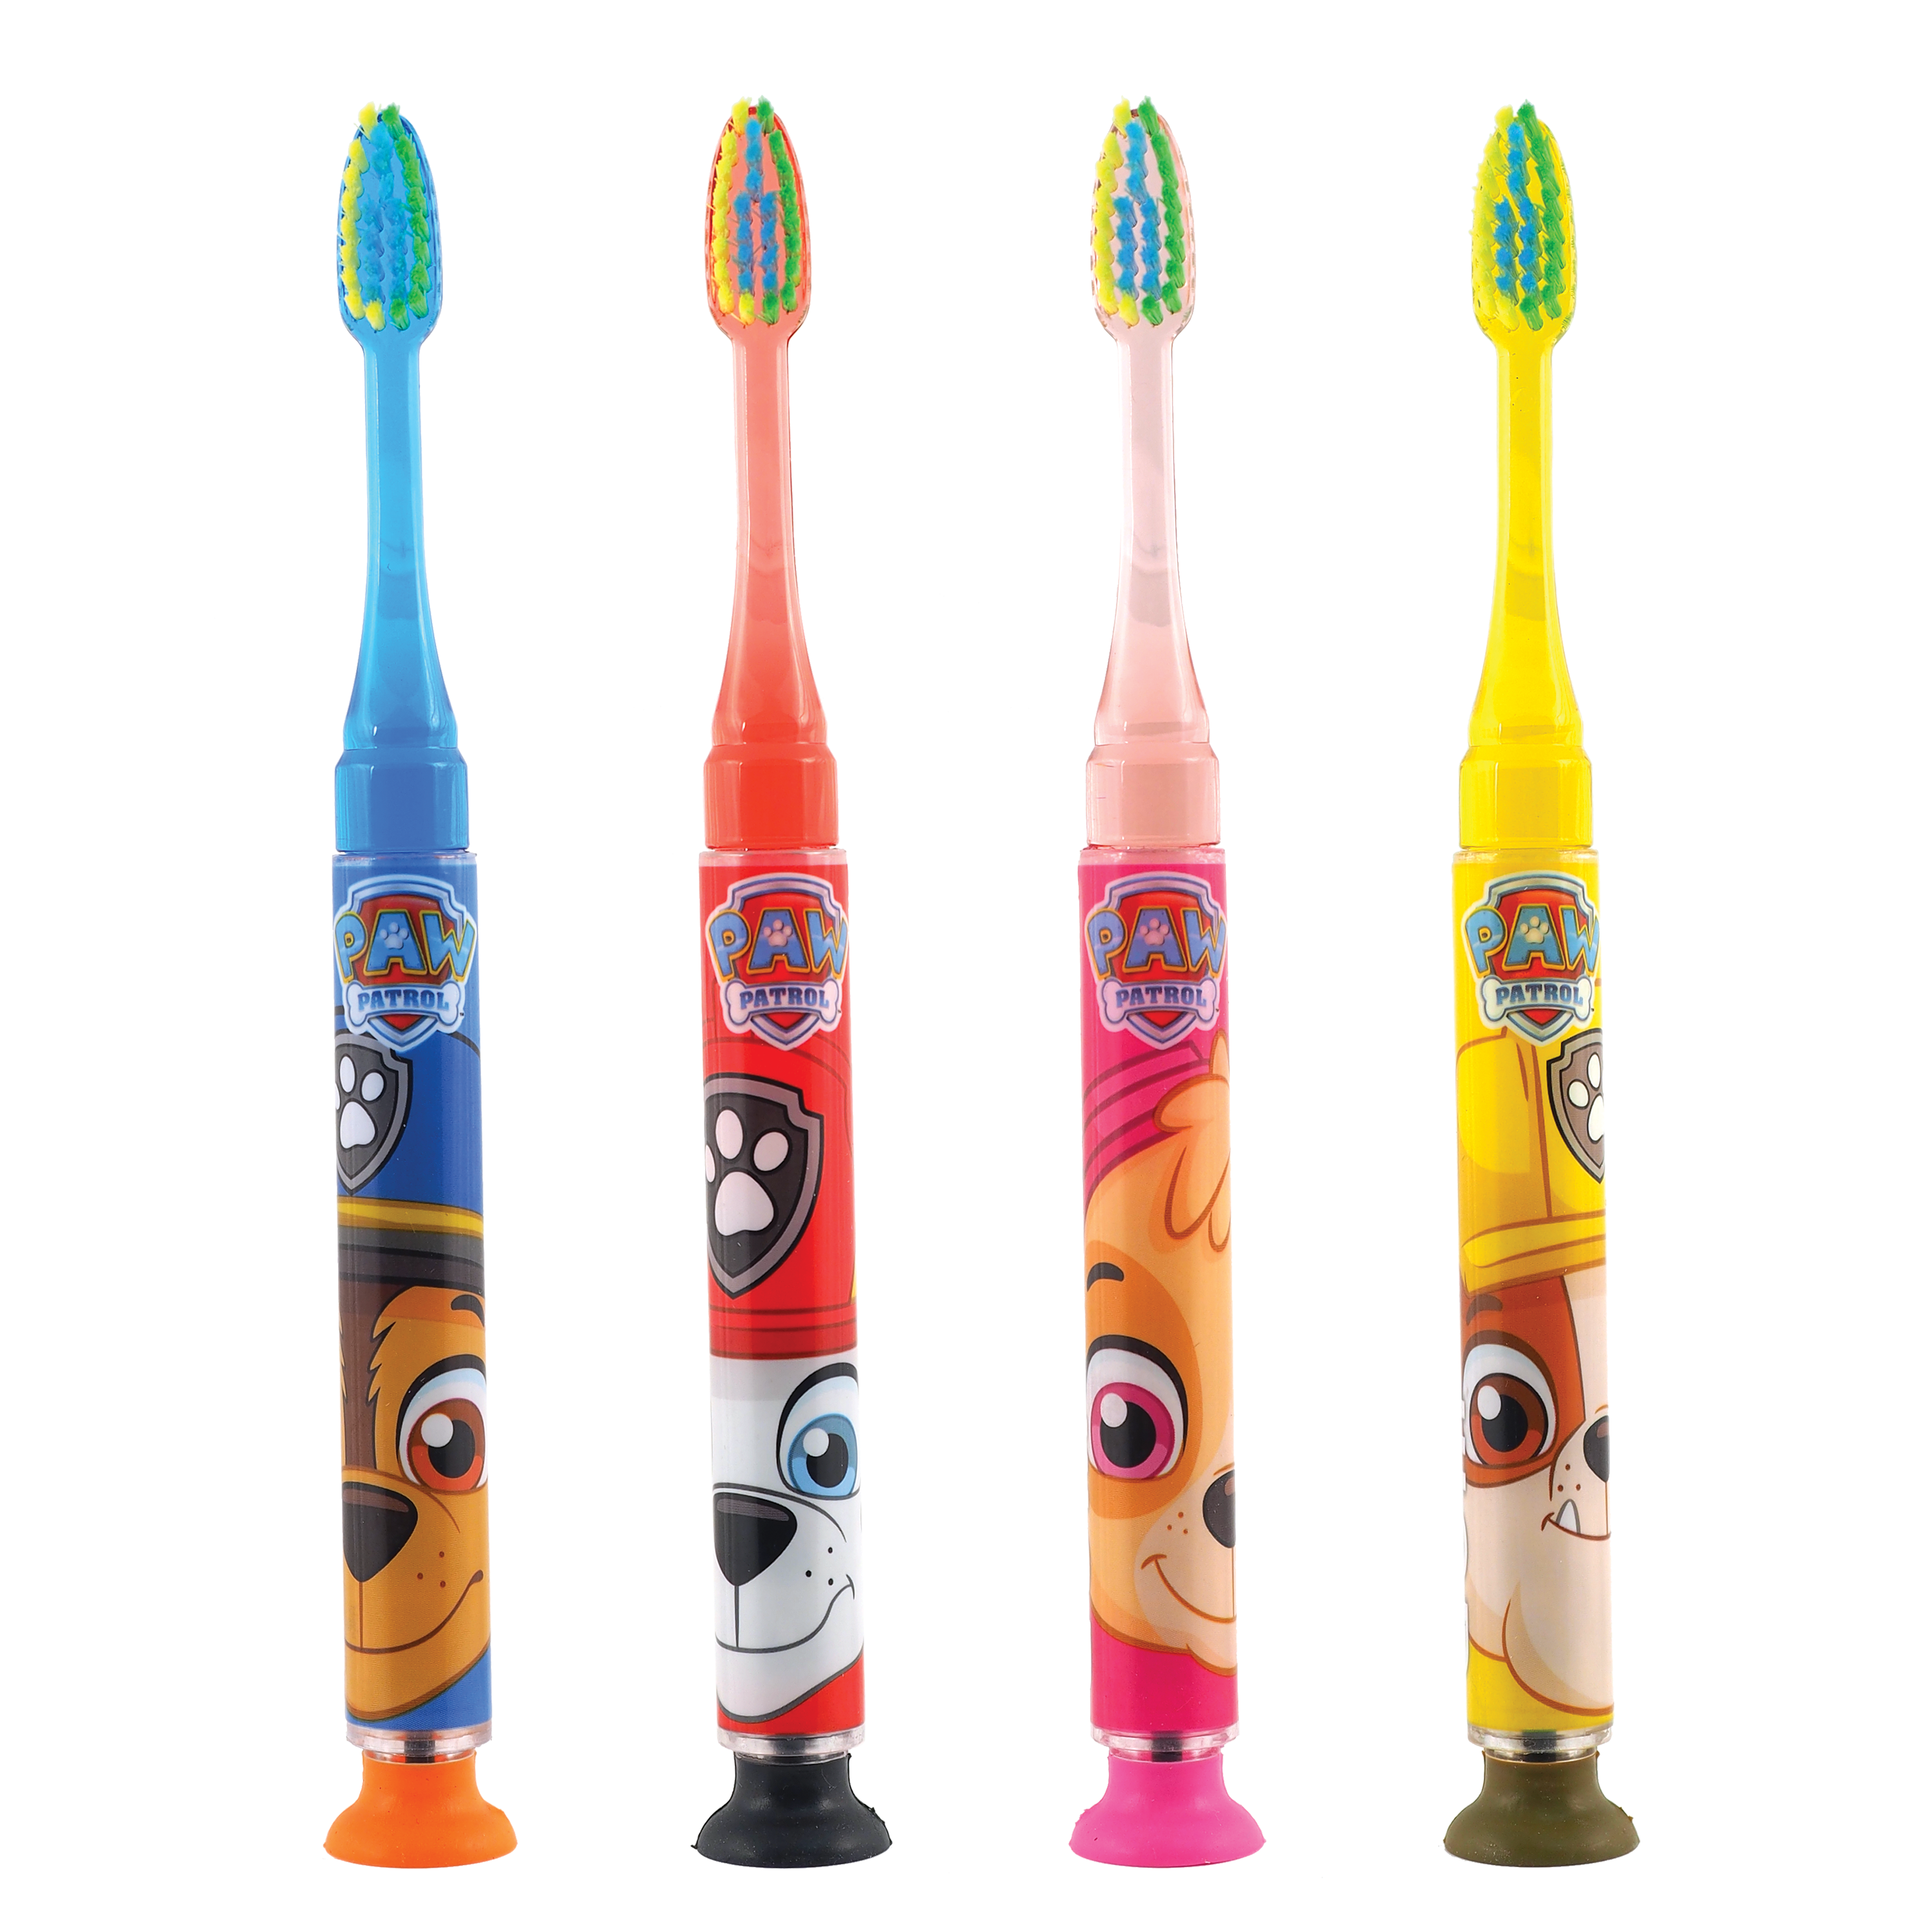 202-Product-Toothbrush-Lightup-PAWPatrol-naked-4colors-old.png